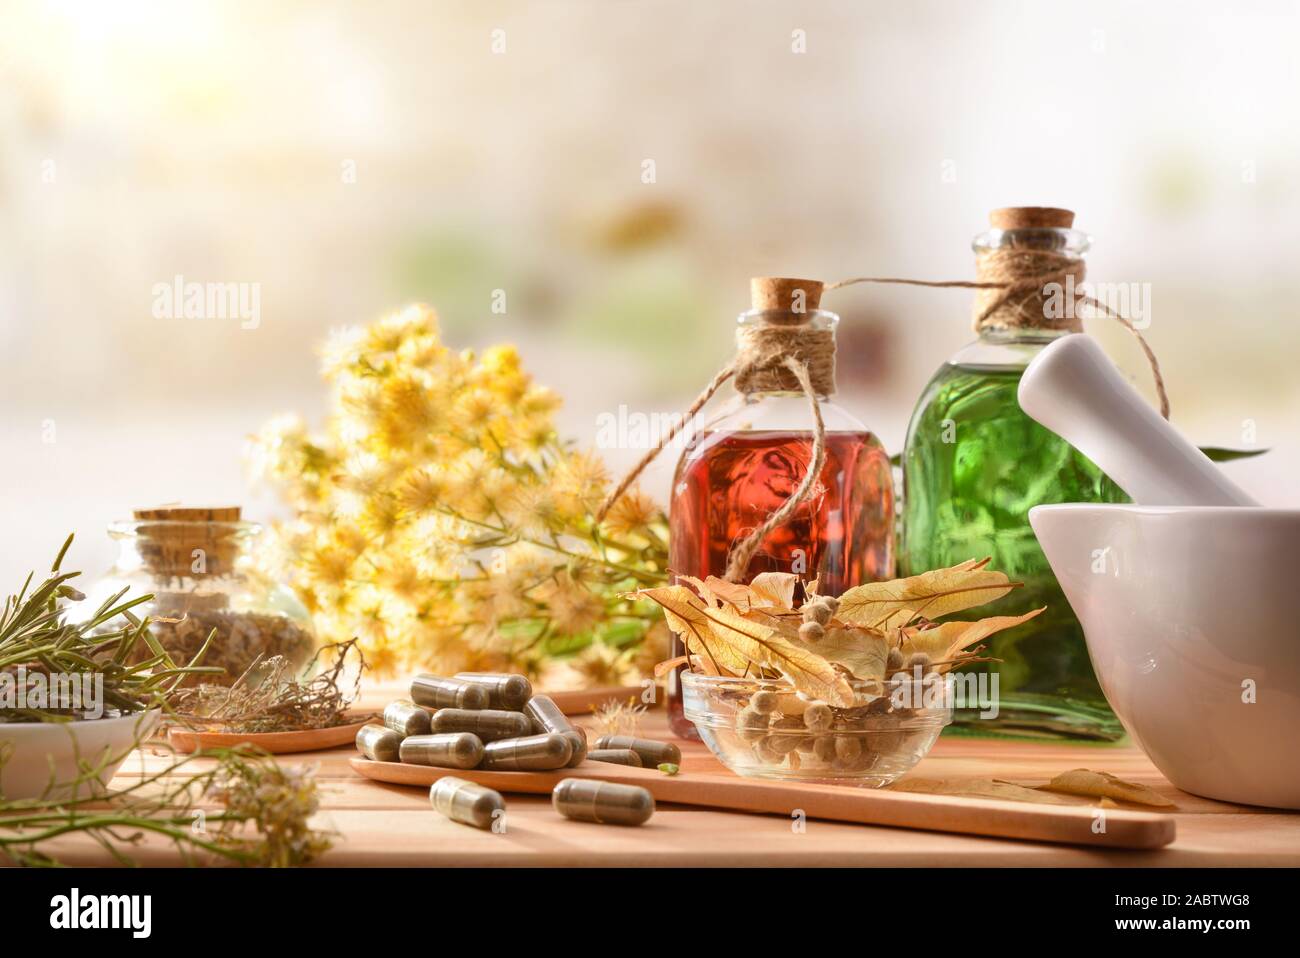 Capsules and bottles of essence of natural medicine with medicinal plants on wooden table in rustic kitchen. Front view. Horizontal composition. Stock Photo